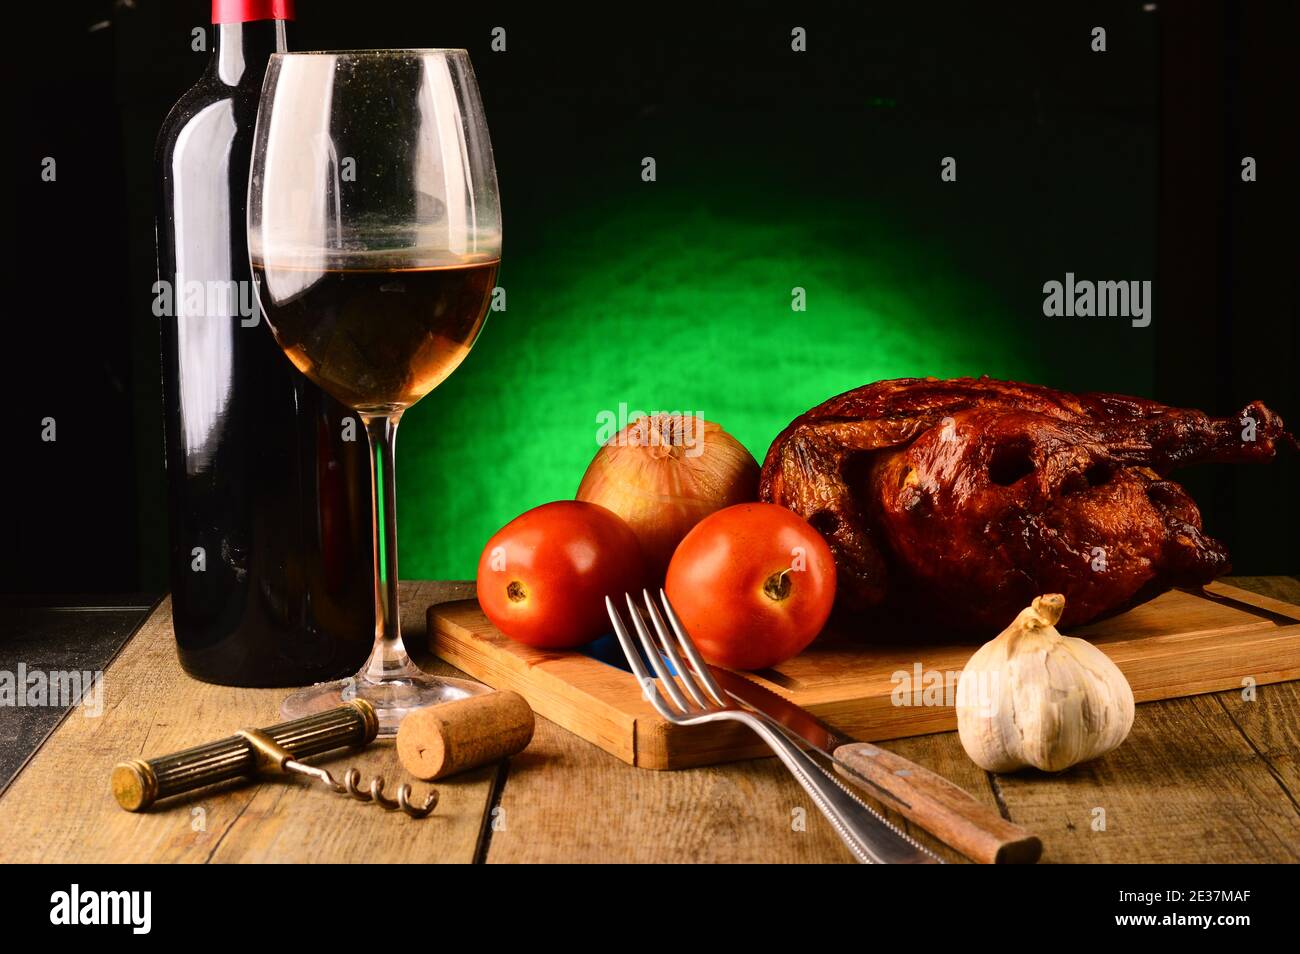 Roasted chicken on the table, lunch time Stock Photo